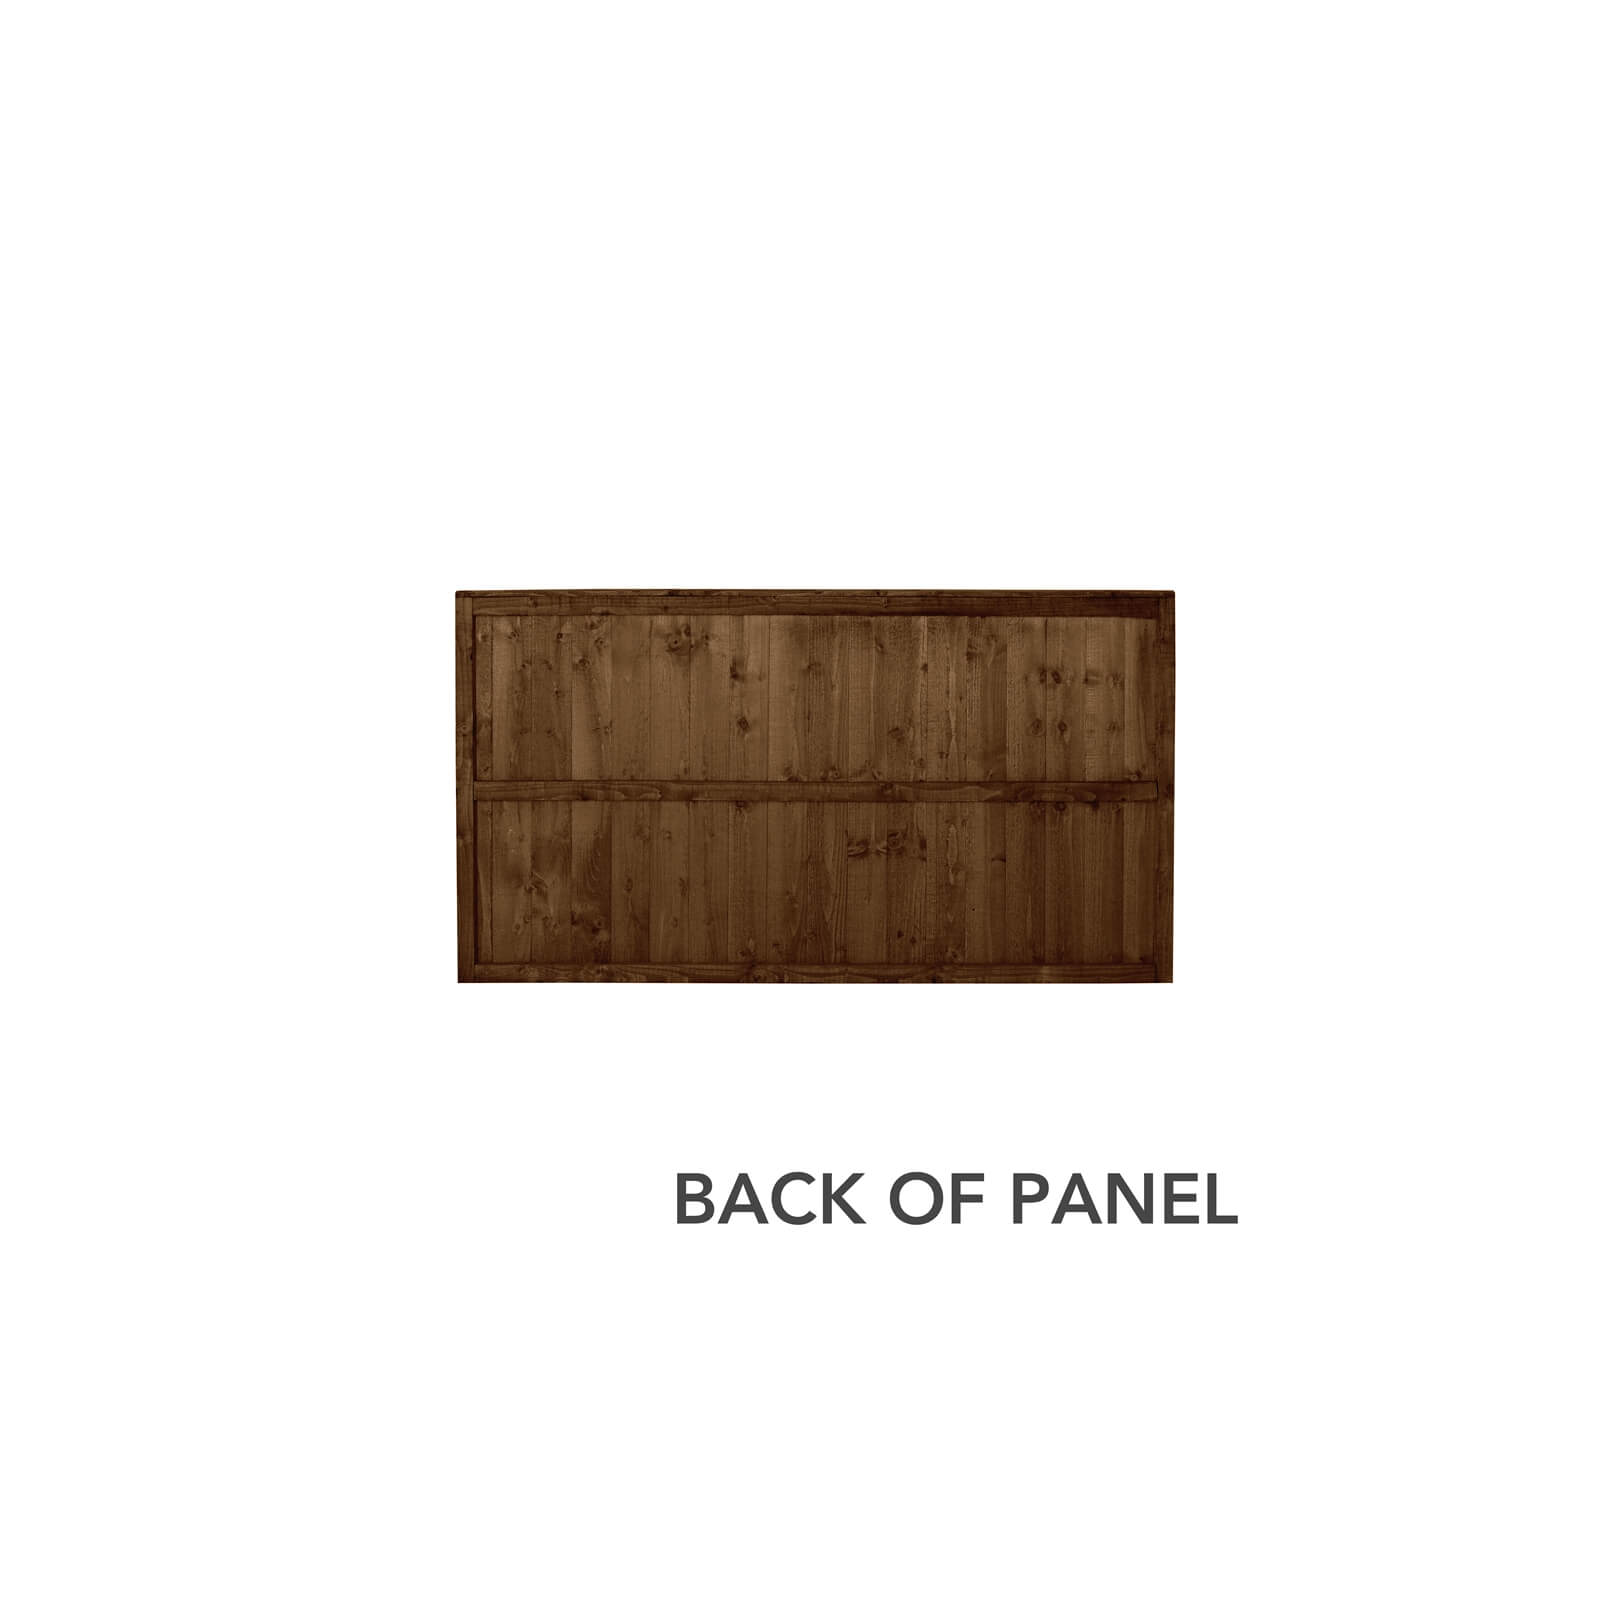 6ft x 3ft (1.83m x 0.93m) Pressure Treated Featheredge Fence Panel (Dark Brown) - Pack of 5